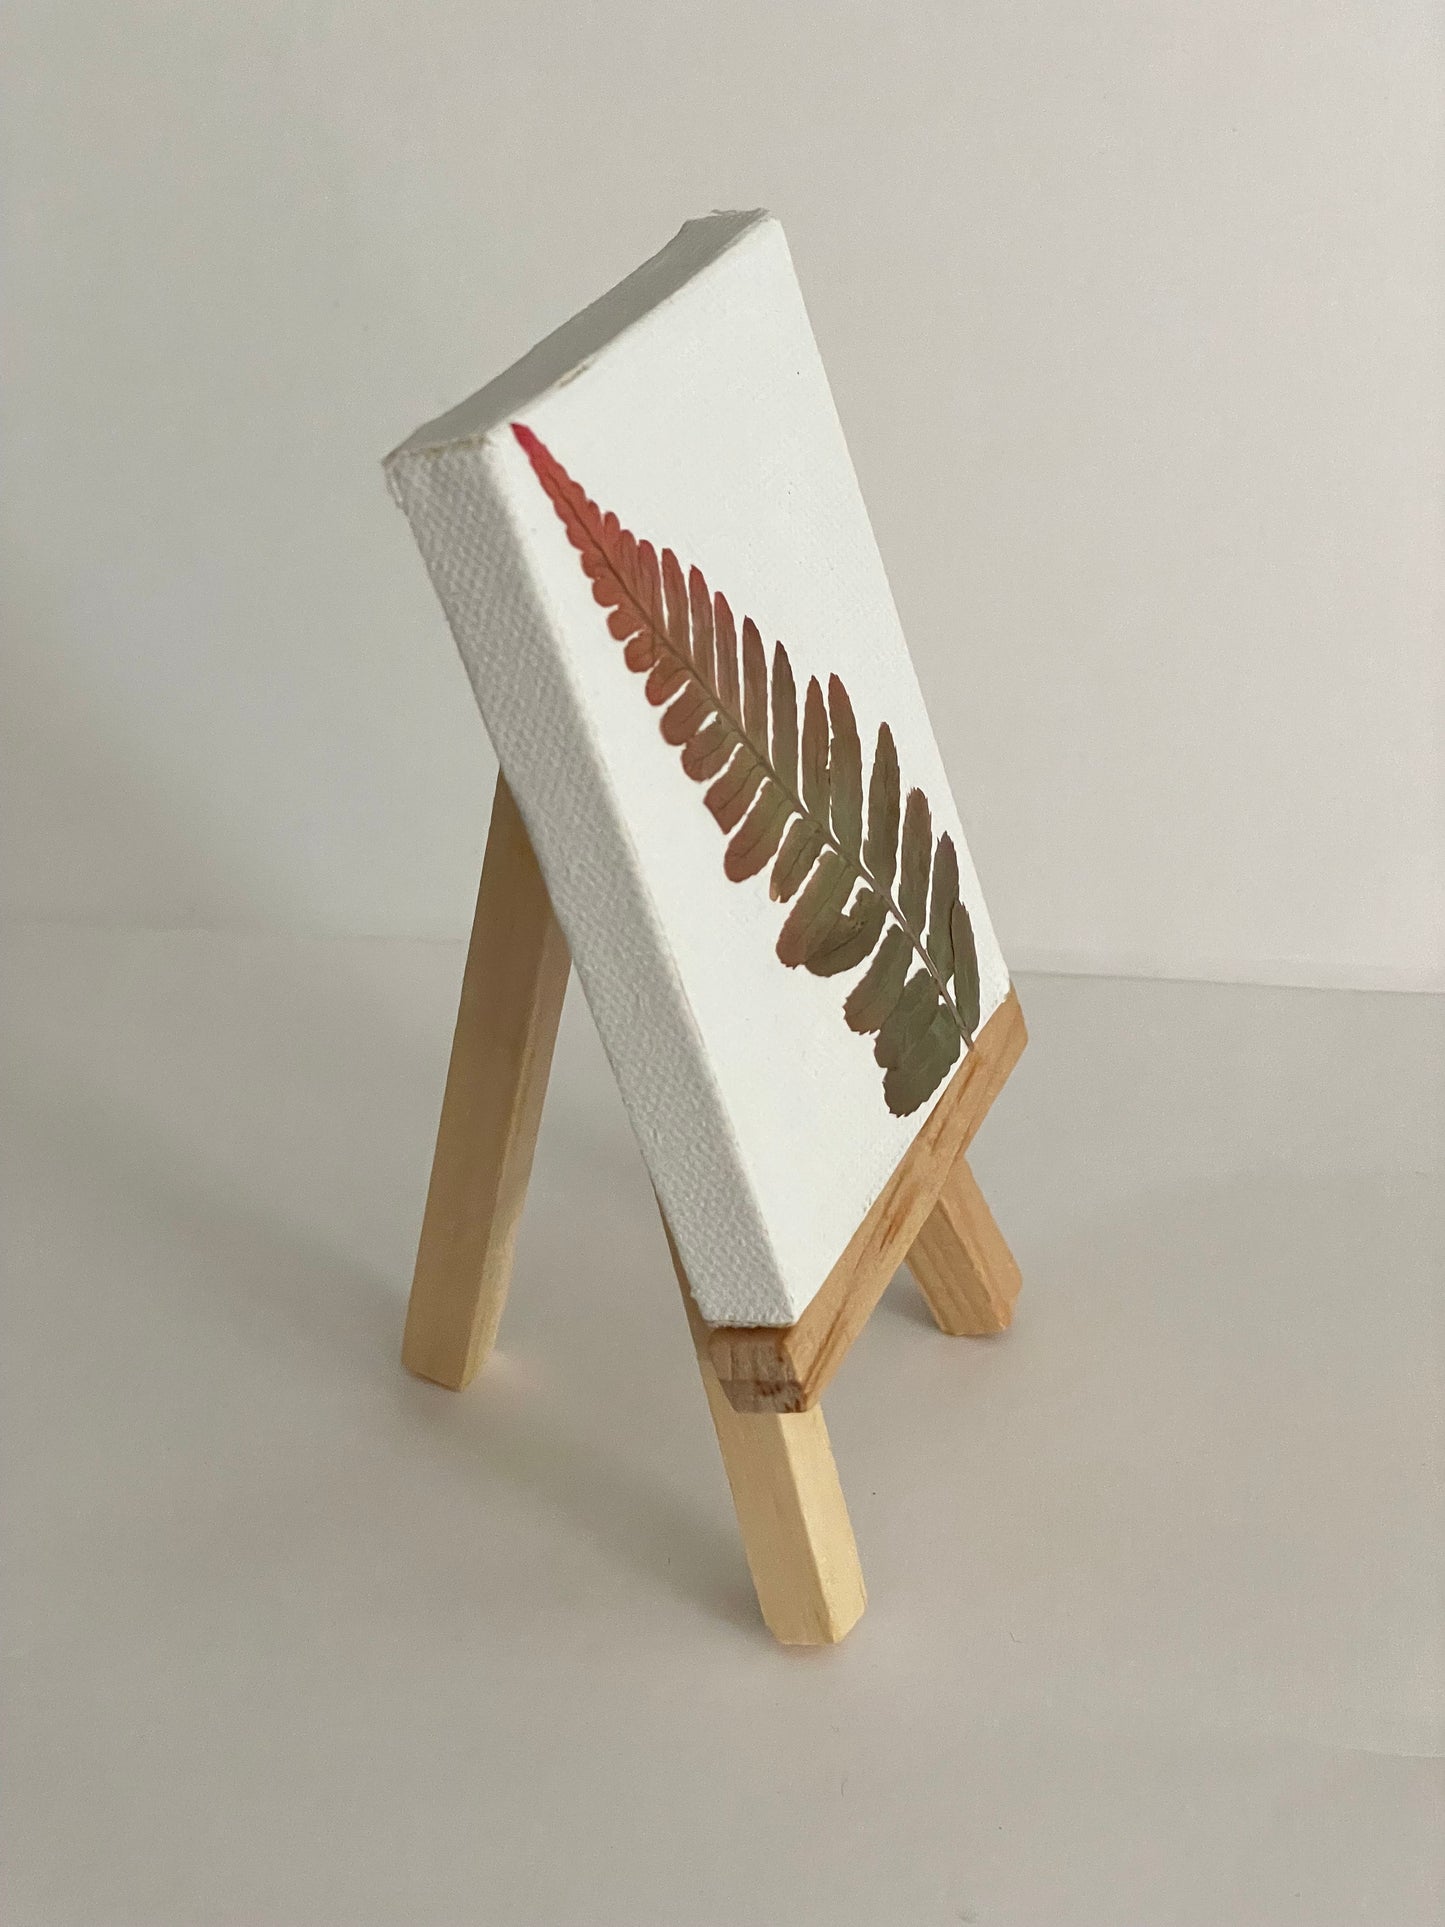 Pressed Japanese Painted Fern #2 on Mini Canvas with Easel